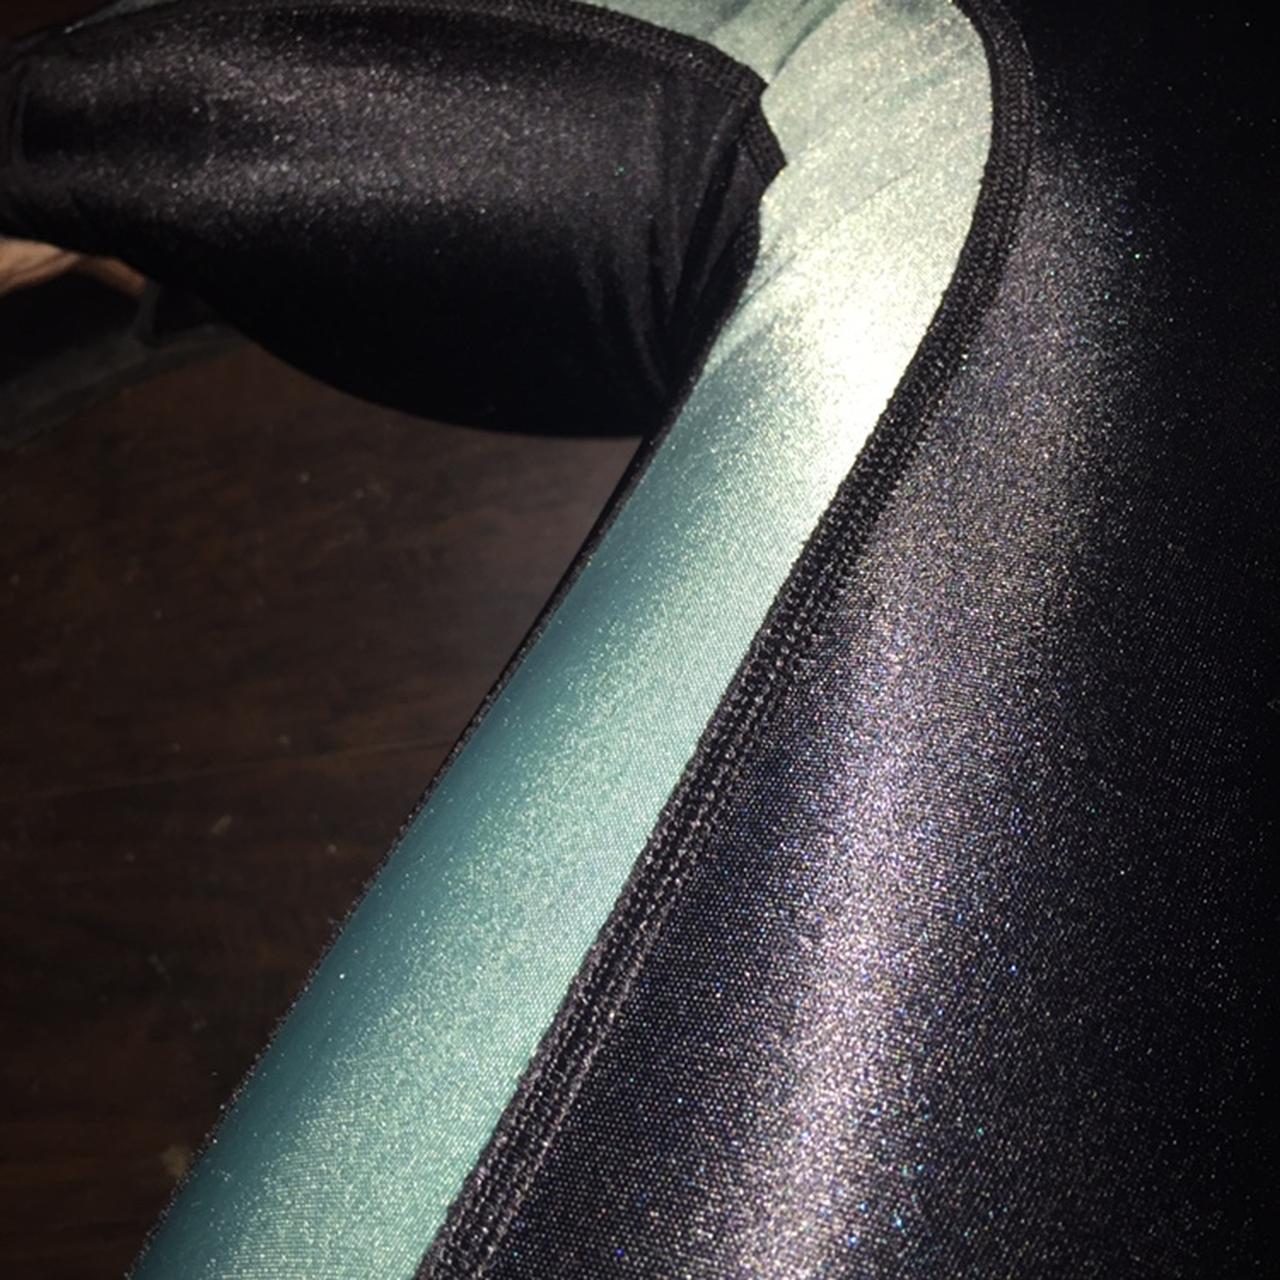 Beautiful shiny 80s vintage style leggings with a